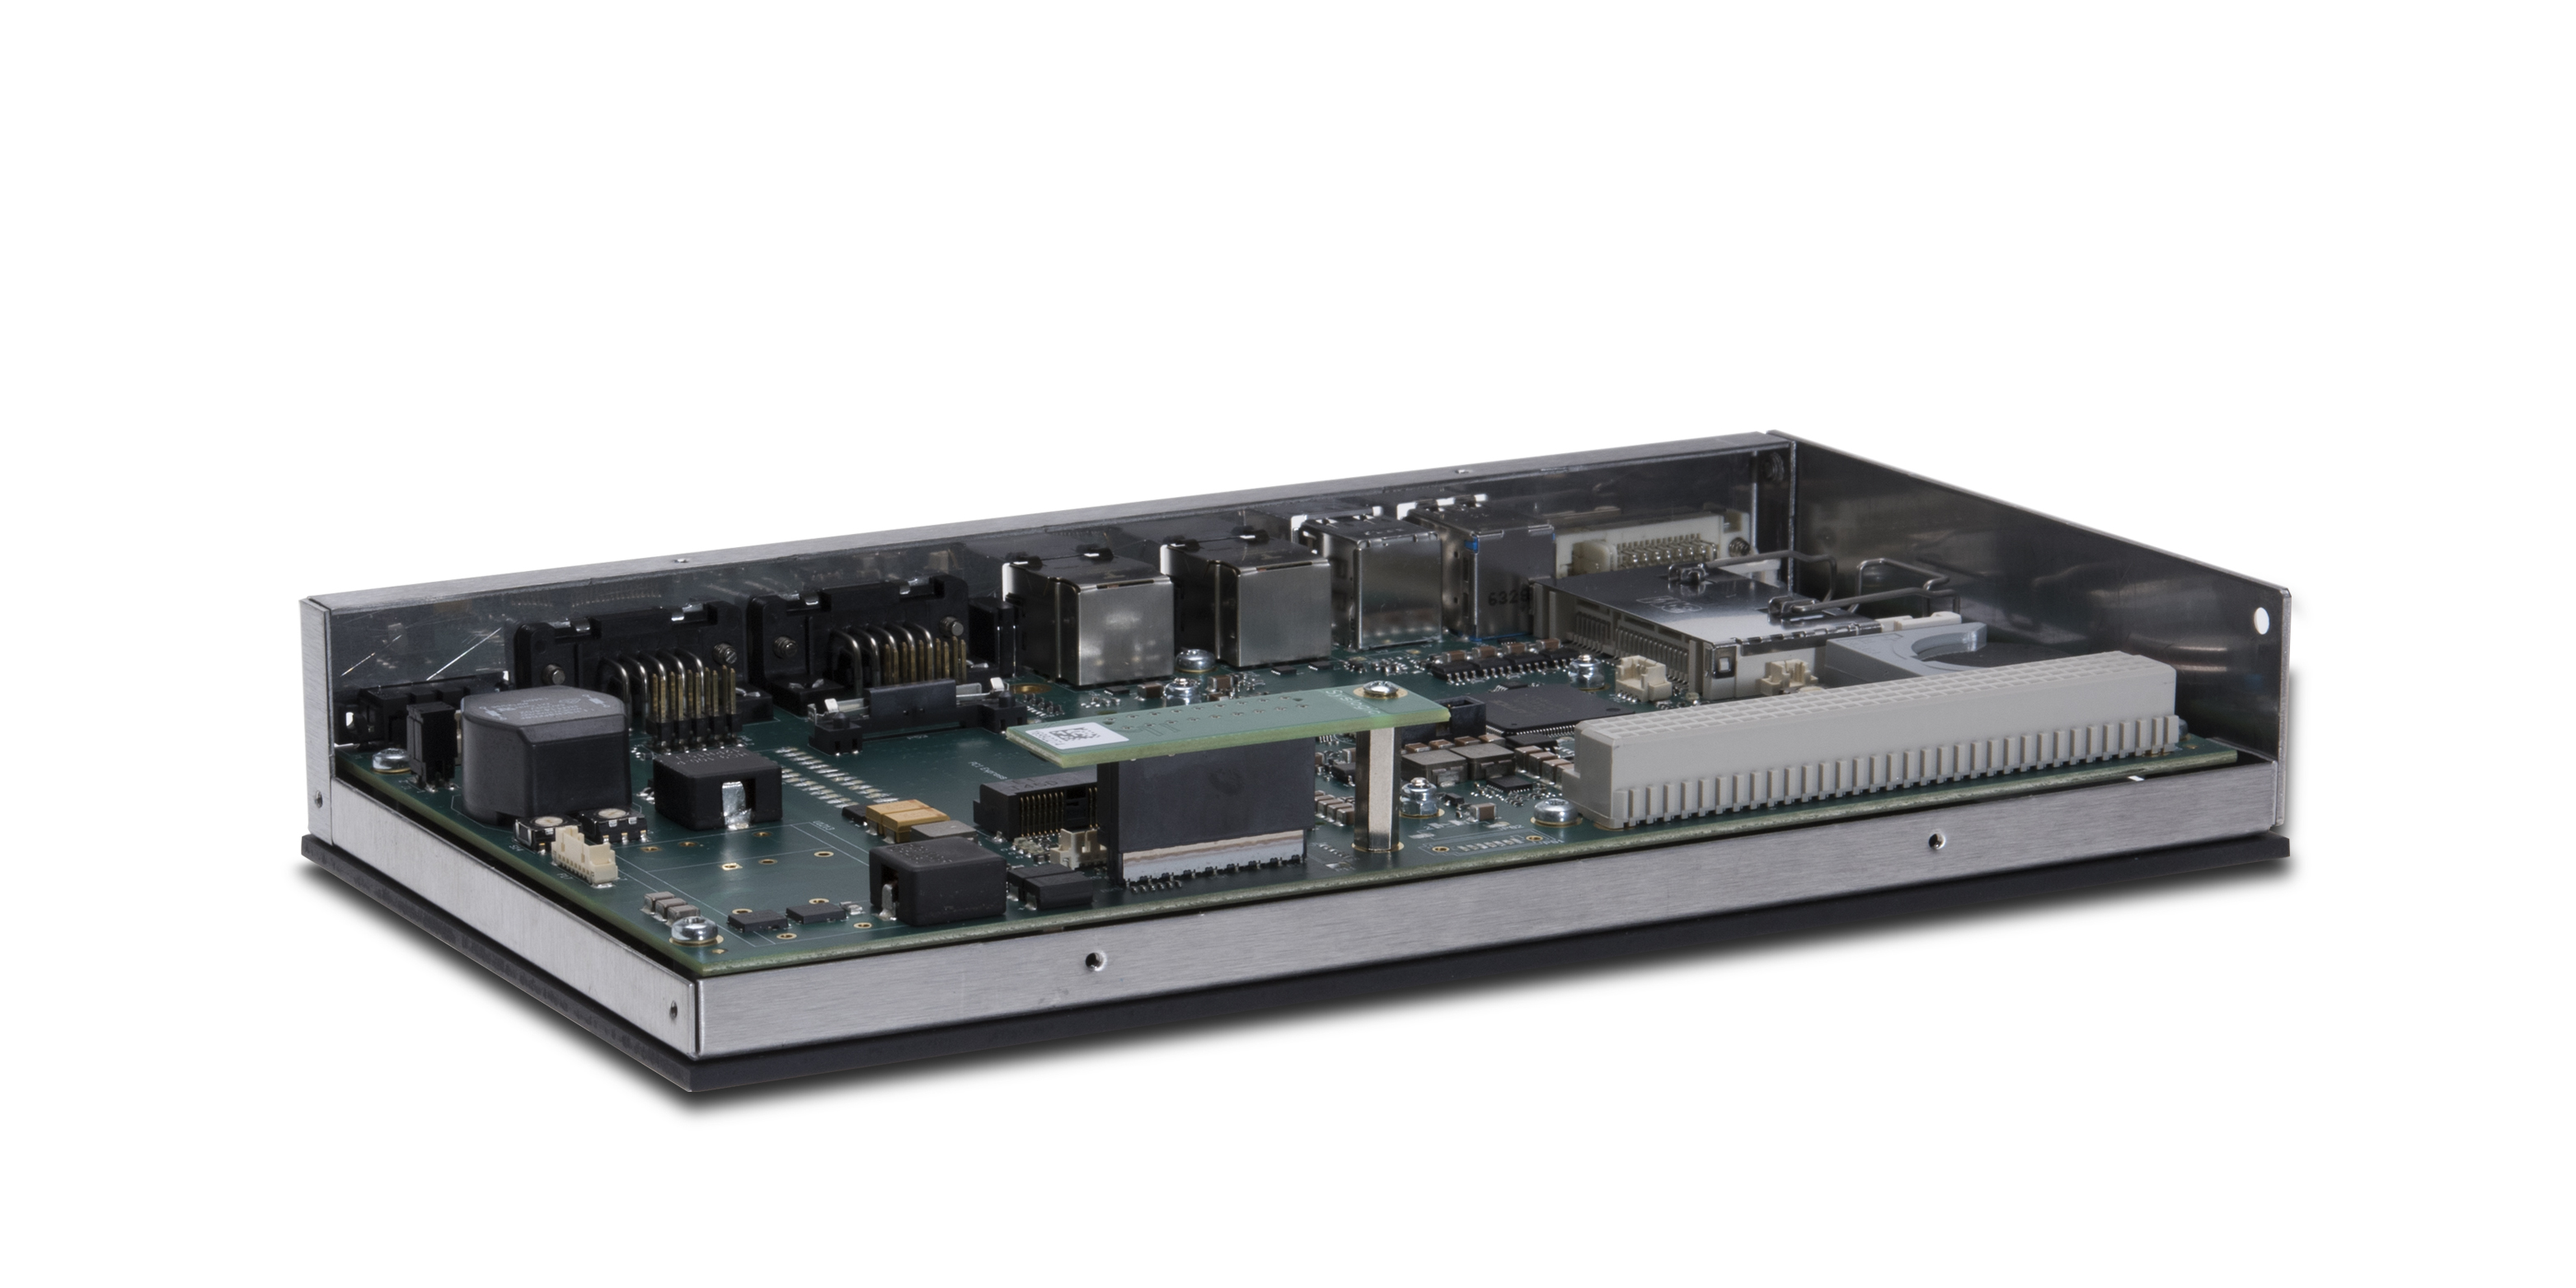 Syslogic Embedded Box PC with integrated Trusted Platform Module